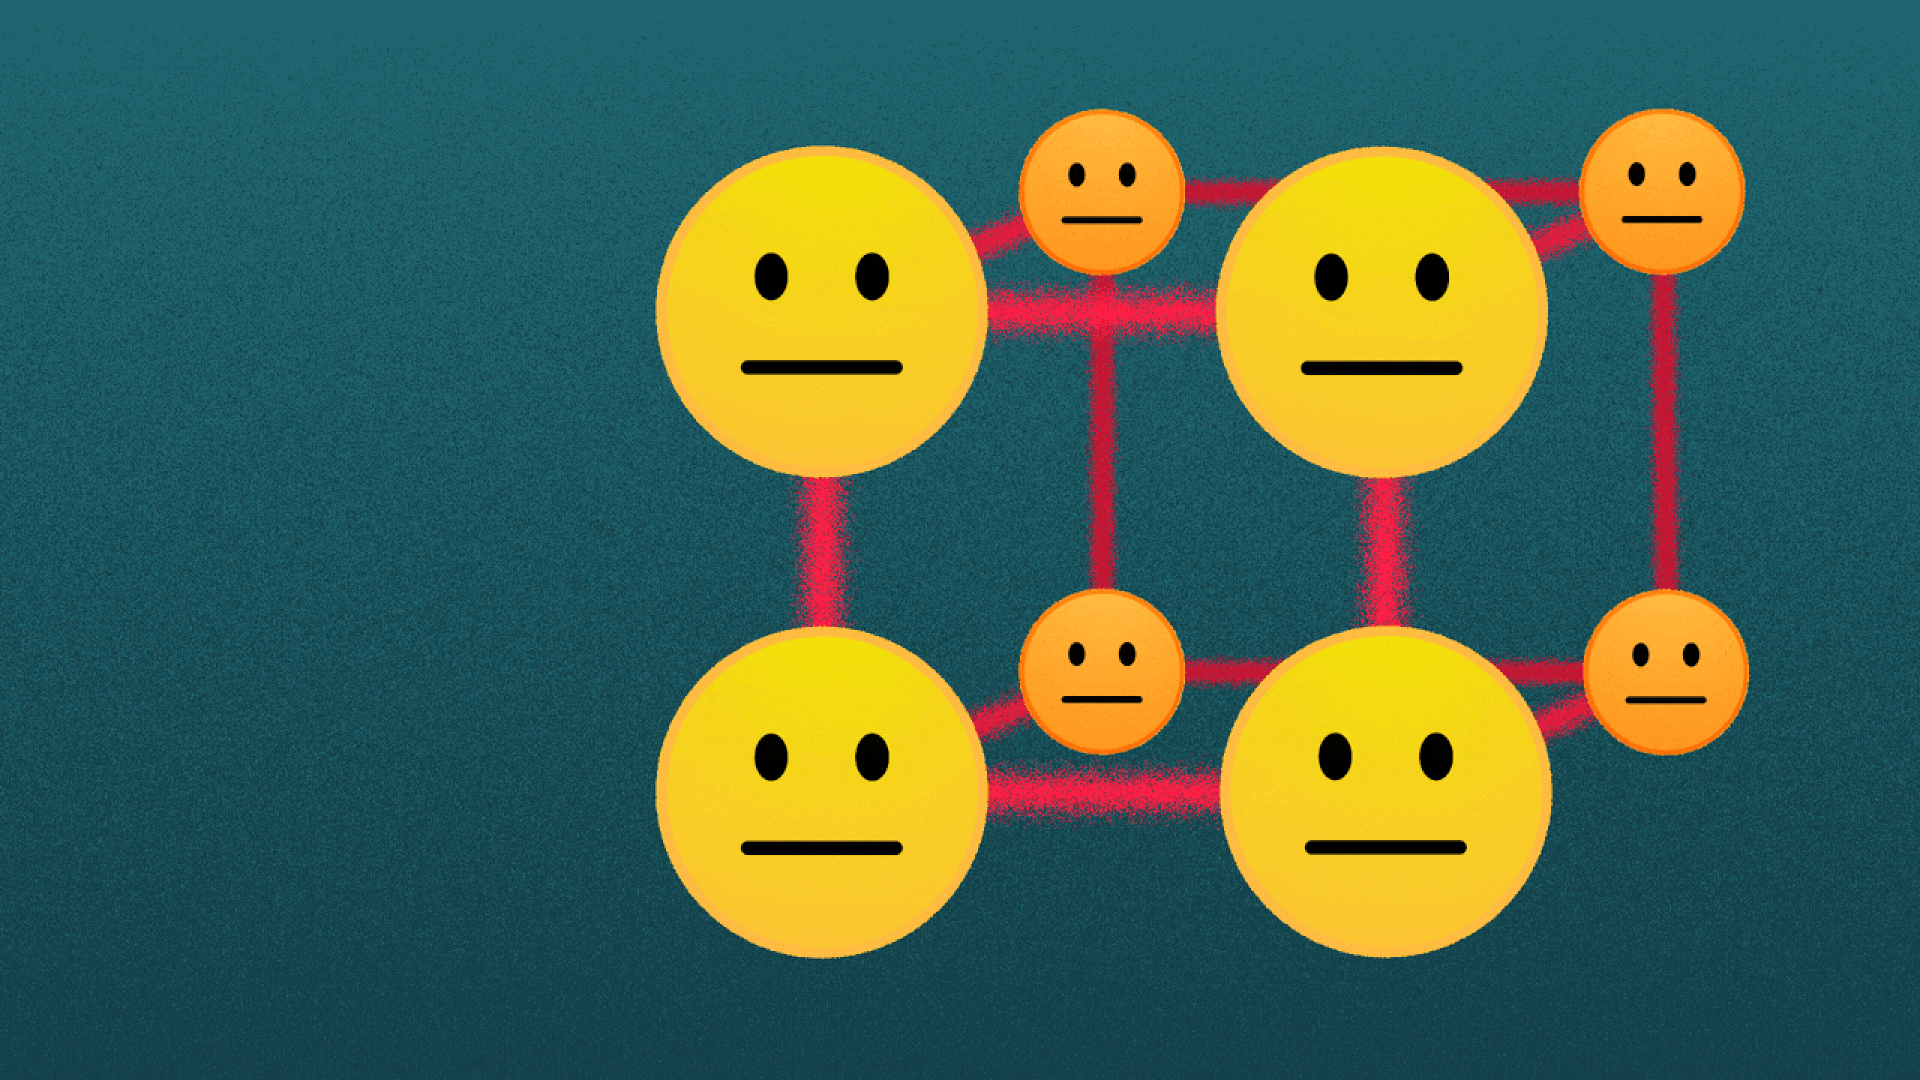 Illustration of a block made out of neutral emojis, which turn into raised-eyebrow emojis.